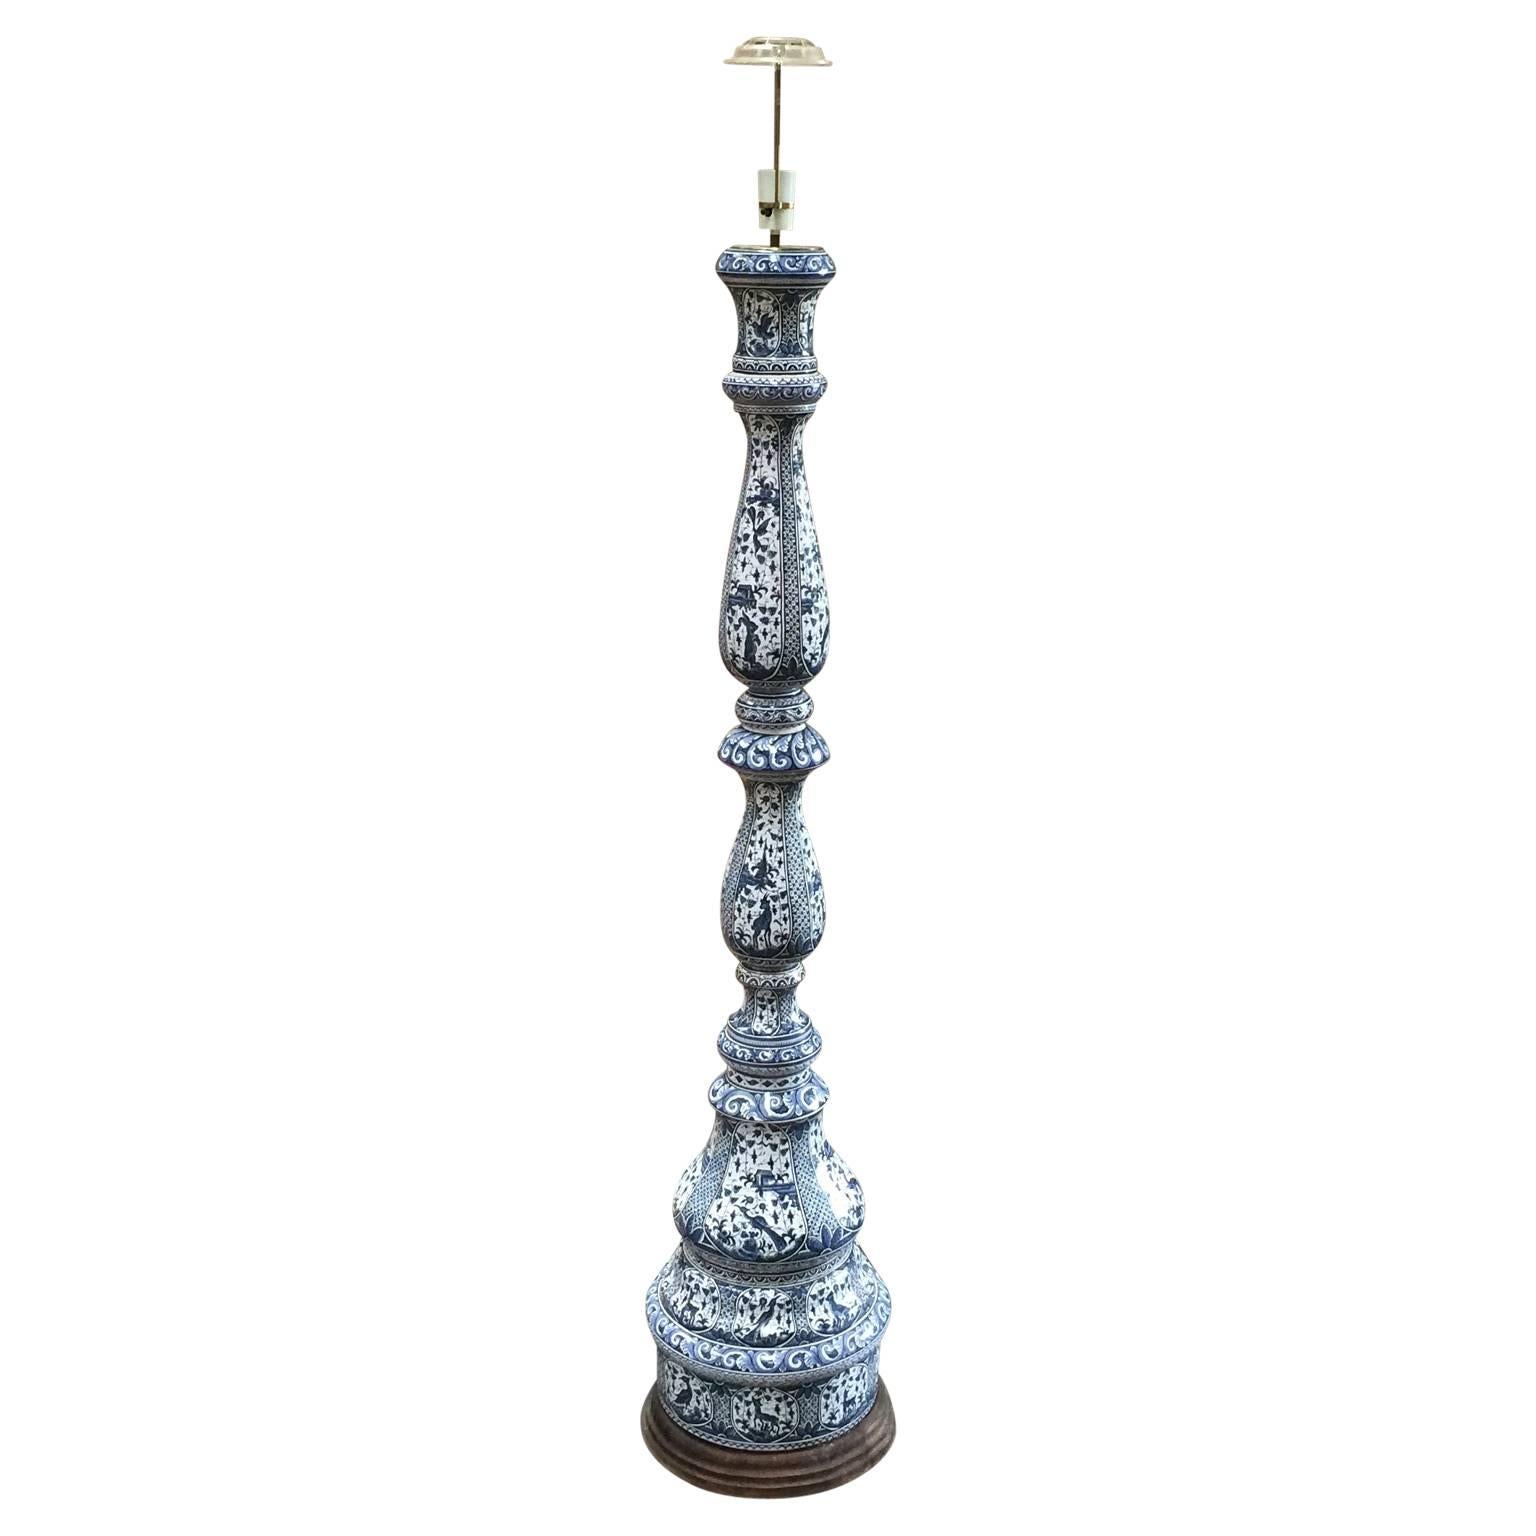 Large 19th Century Blue And White Delft Floor Lamp

Delft floor lamp on wooden base. Probably converted from a candelabra into floor lamp.